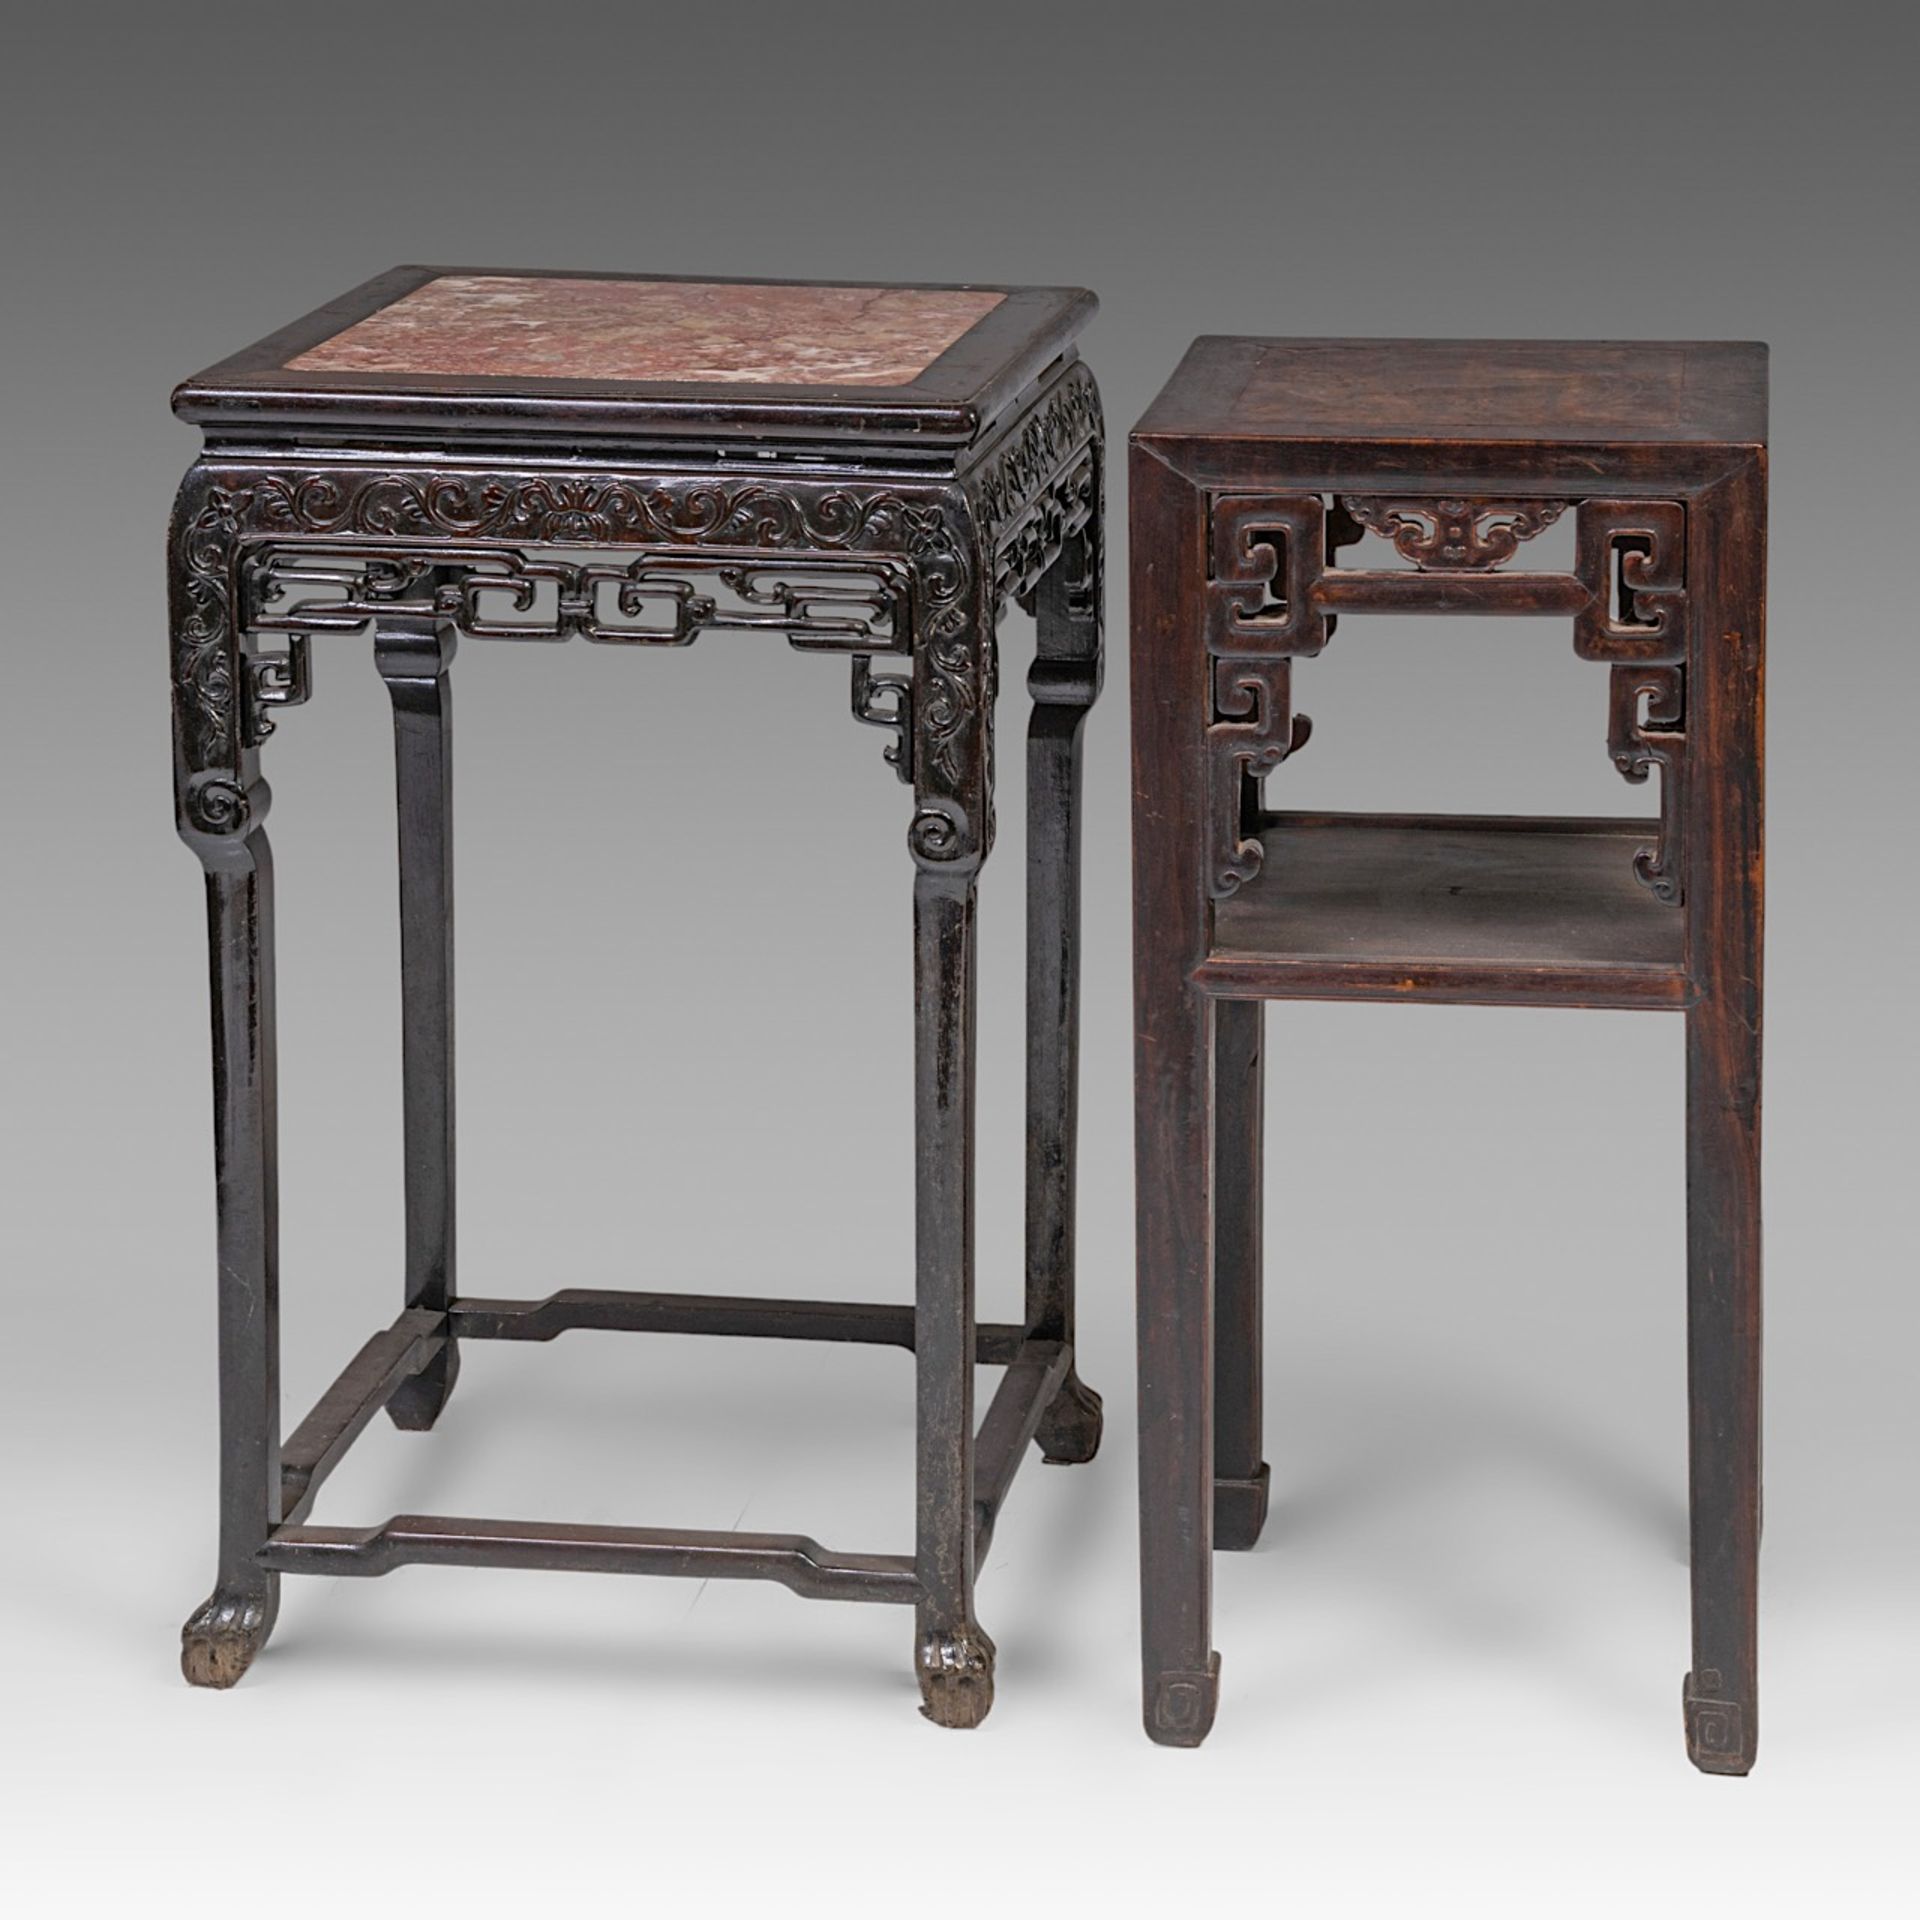 Two South-Chinese carved hardwood bases, one with a marble top, late Qing, largest H 82 - 48 x 48 cm - Bild 3 aus 7